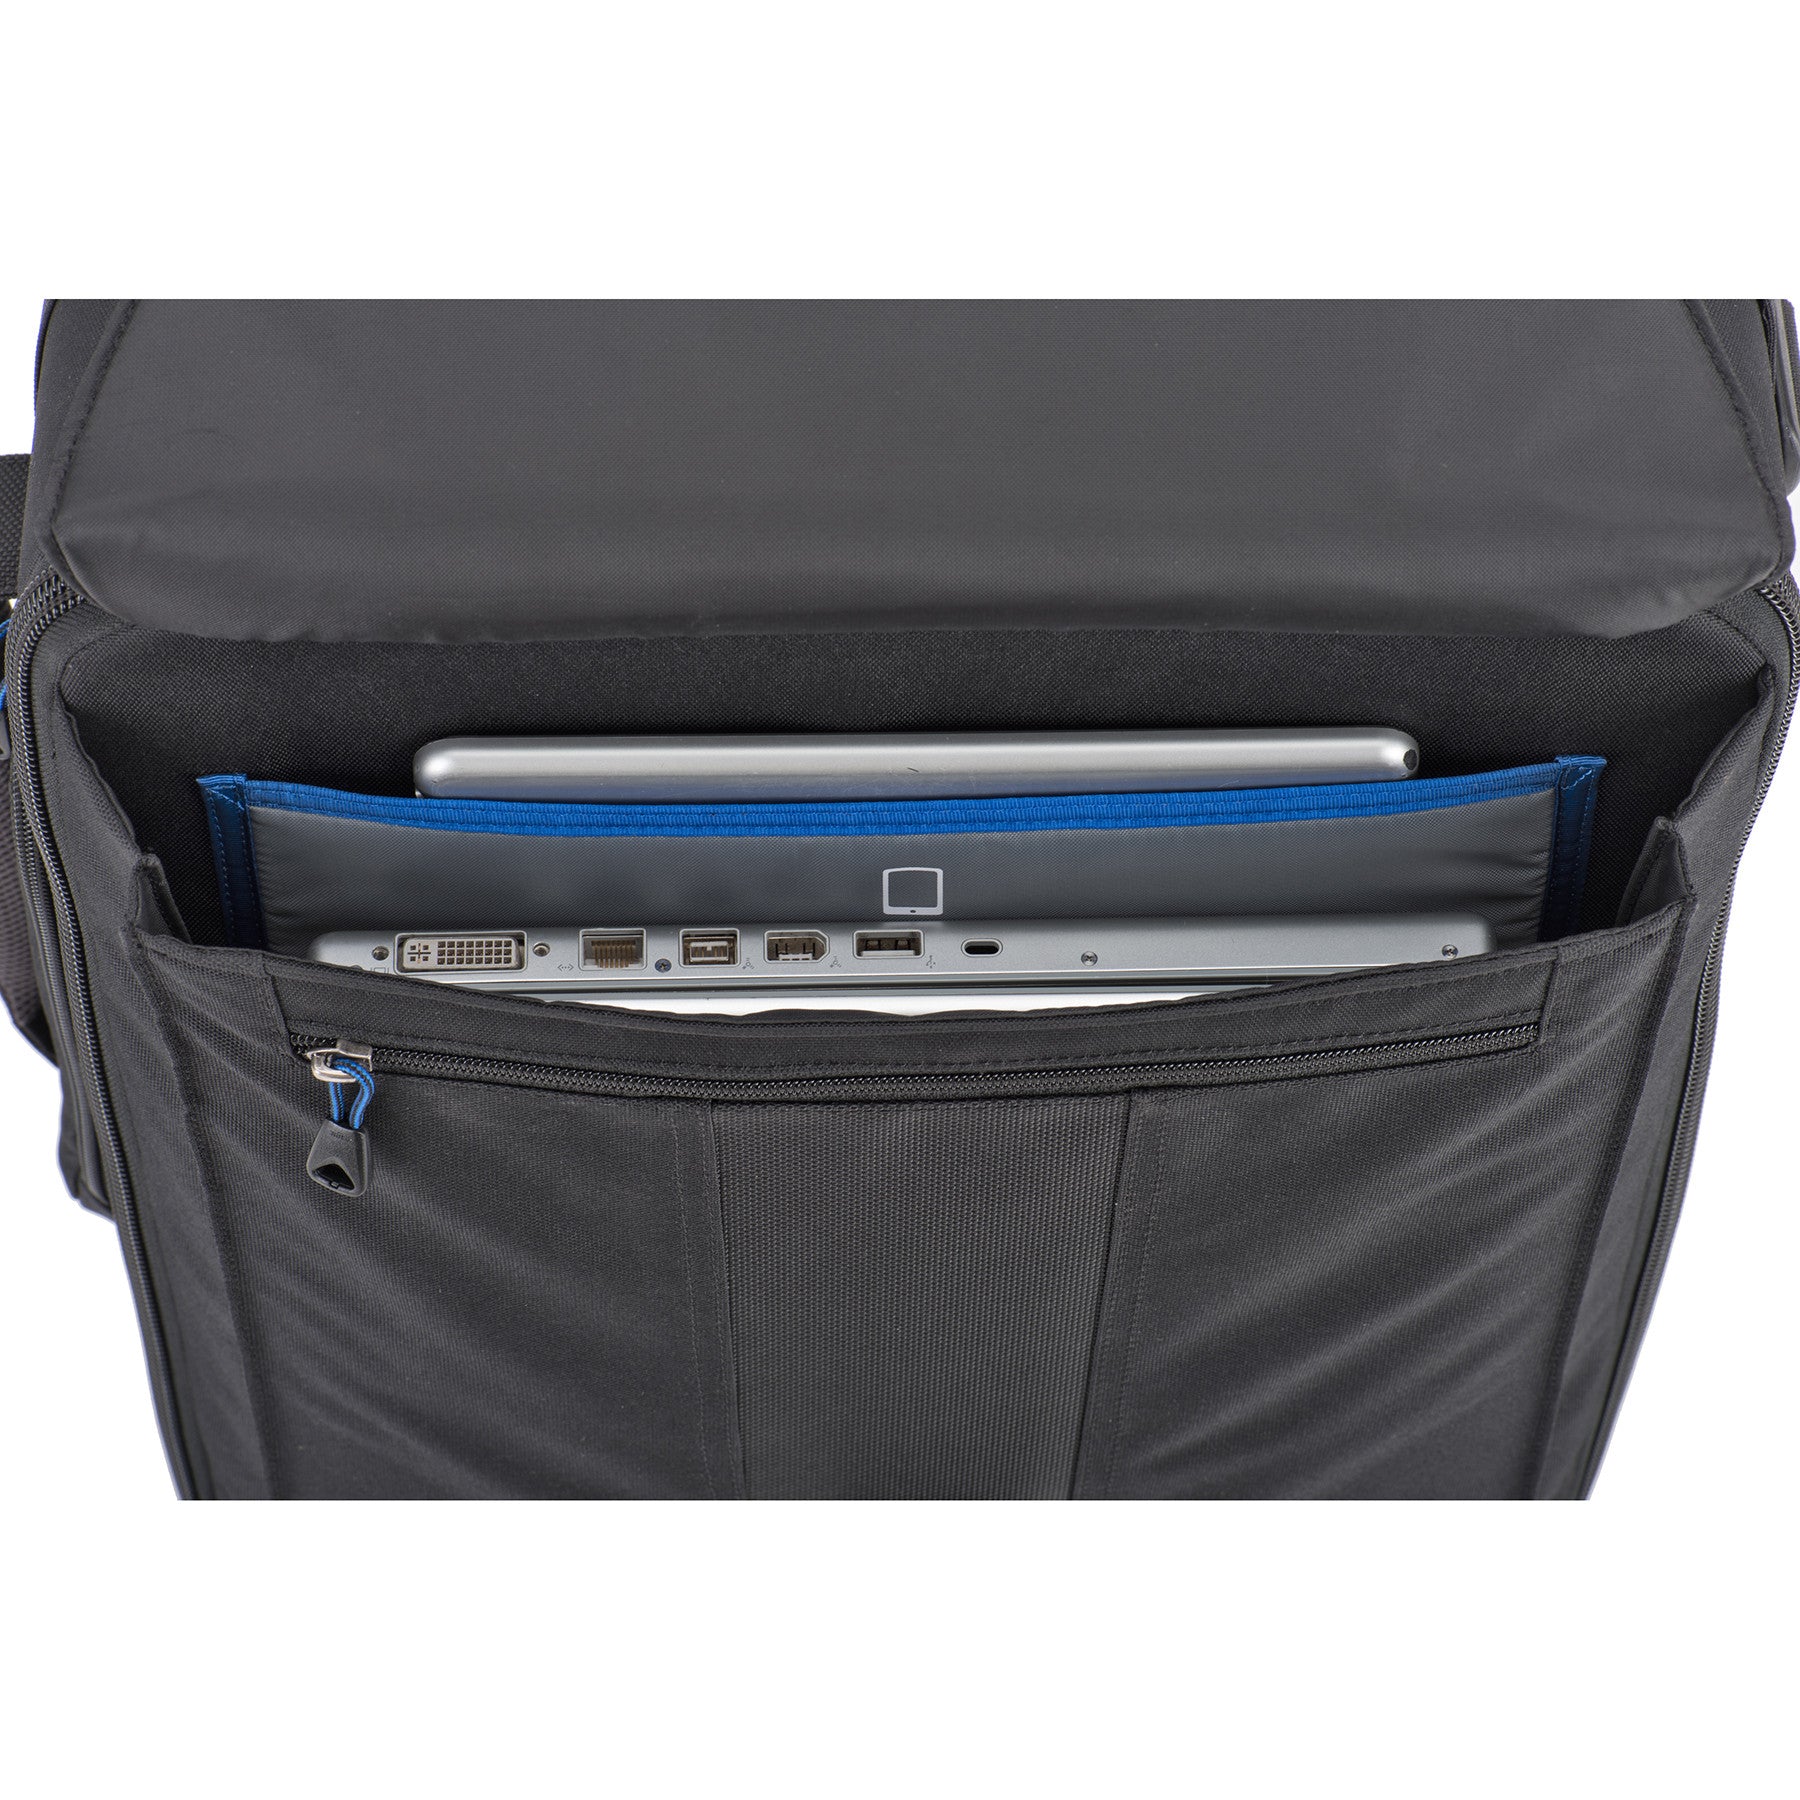 Large front pocket fits up to a 17” laptop and a 10” tablet